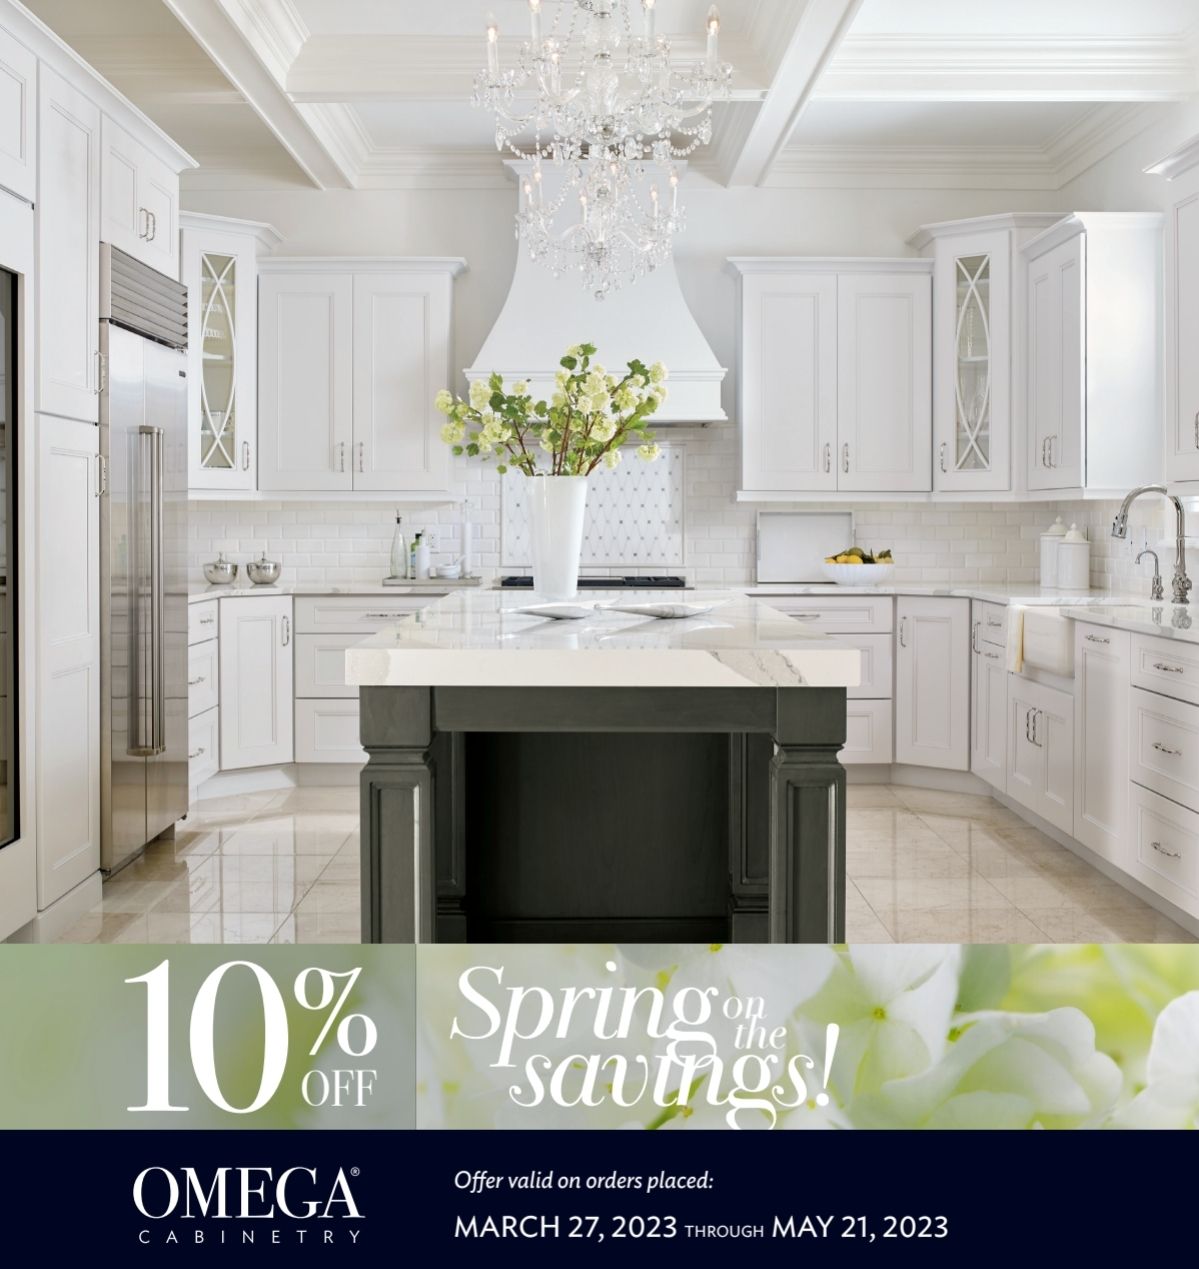 Promo - Spring on the Savings 10% Off Sale - Kitchen Sales